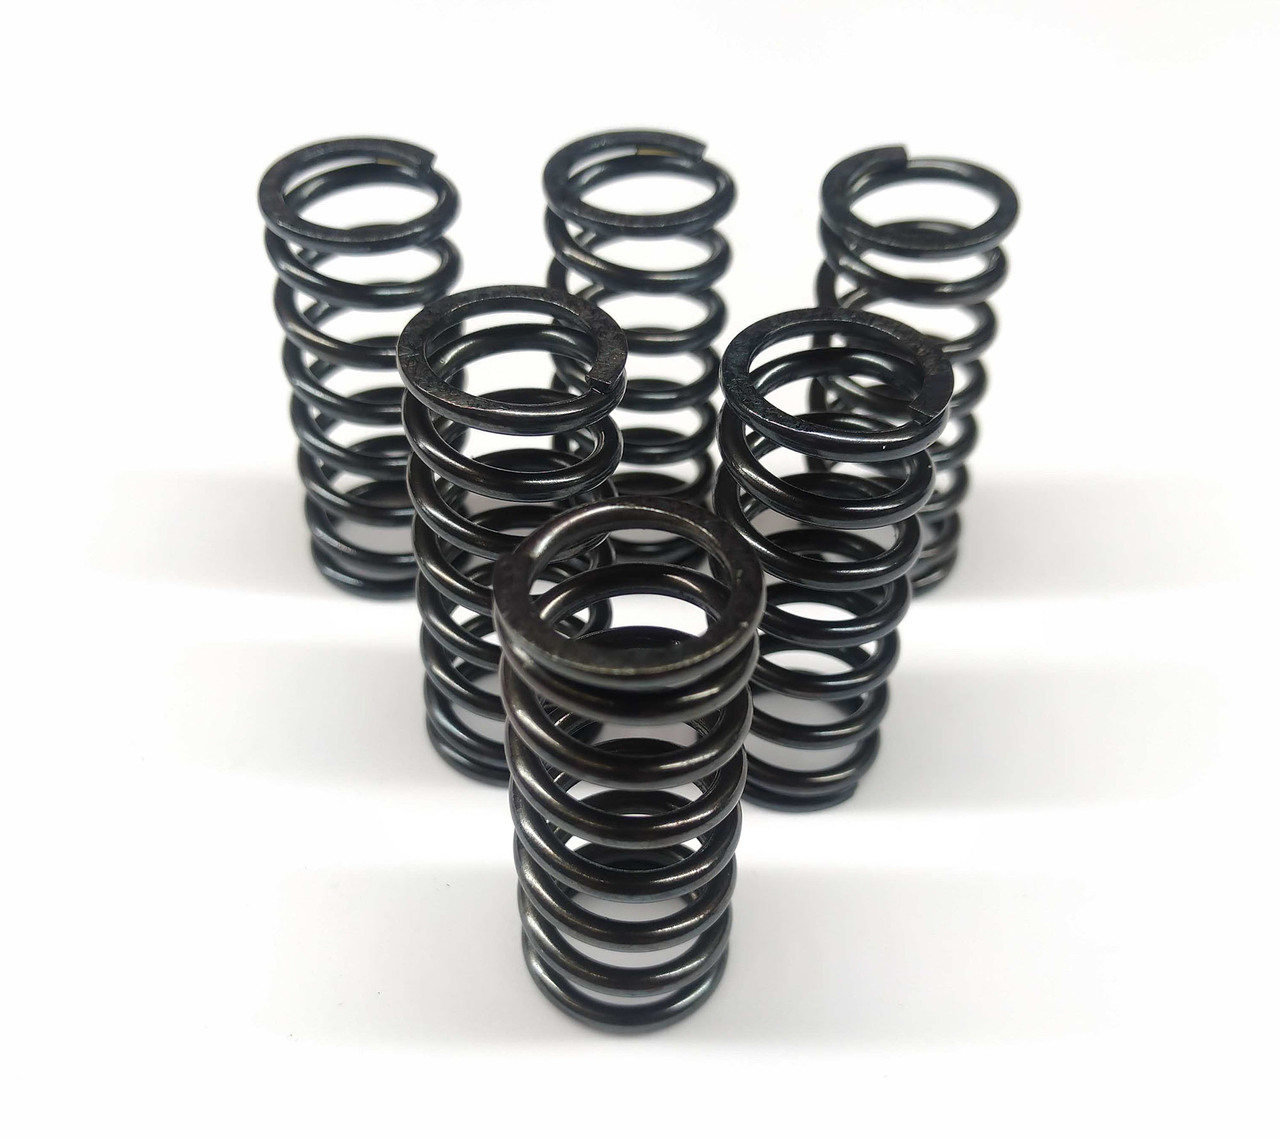 WORKS Clutch Spring Kit - 07-14 Yamaha R1 - Click Image to Close